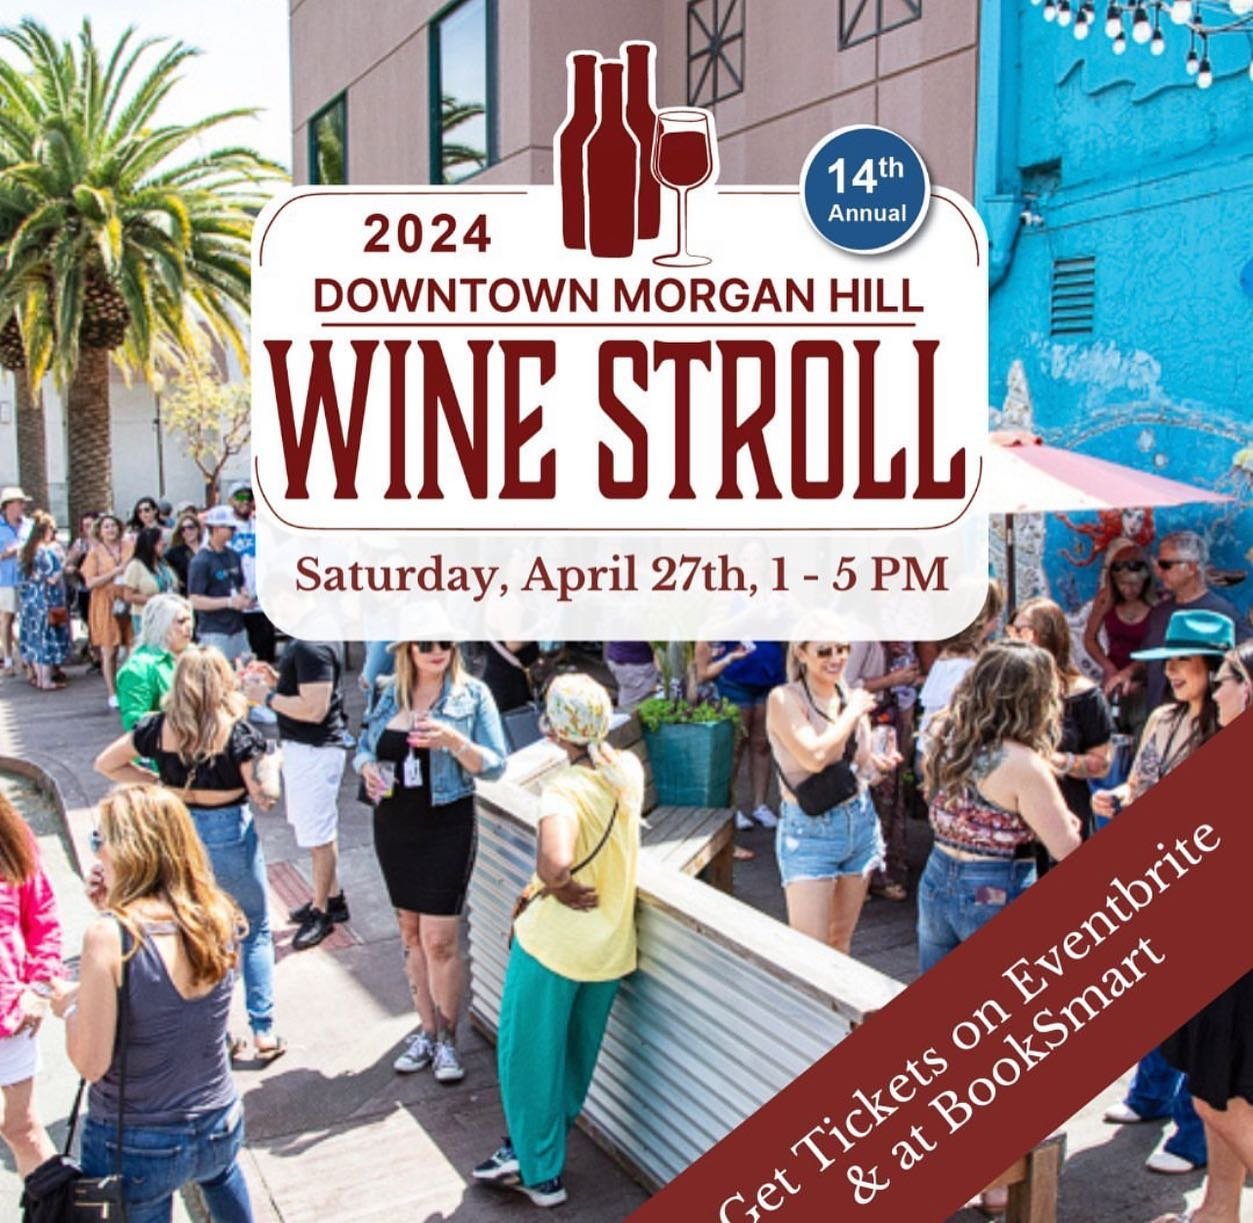 Dogs and wine make everything fine 🐶🍷The 14th Annual Downtown Morgan Hill Wine Stroll and Parade 4 Paws is happening this weekend. Grab your last-minute tickets and get ready to sip, stroll, and vote for your favorite pup this Saturday from 1p-5p. 